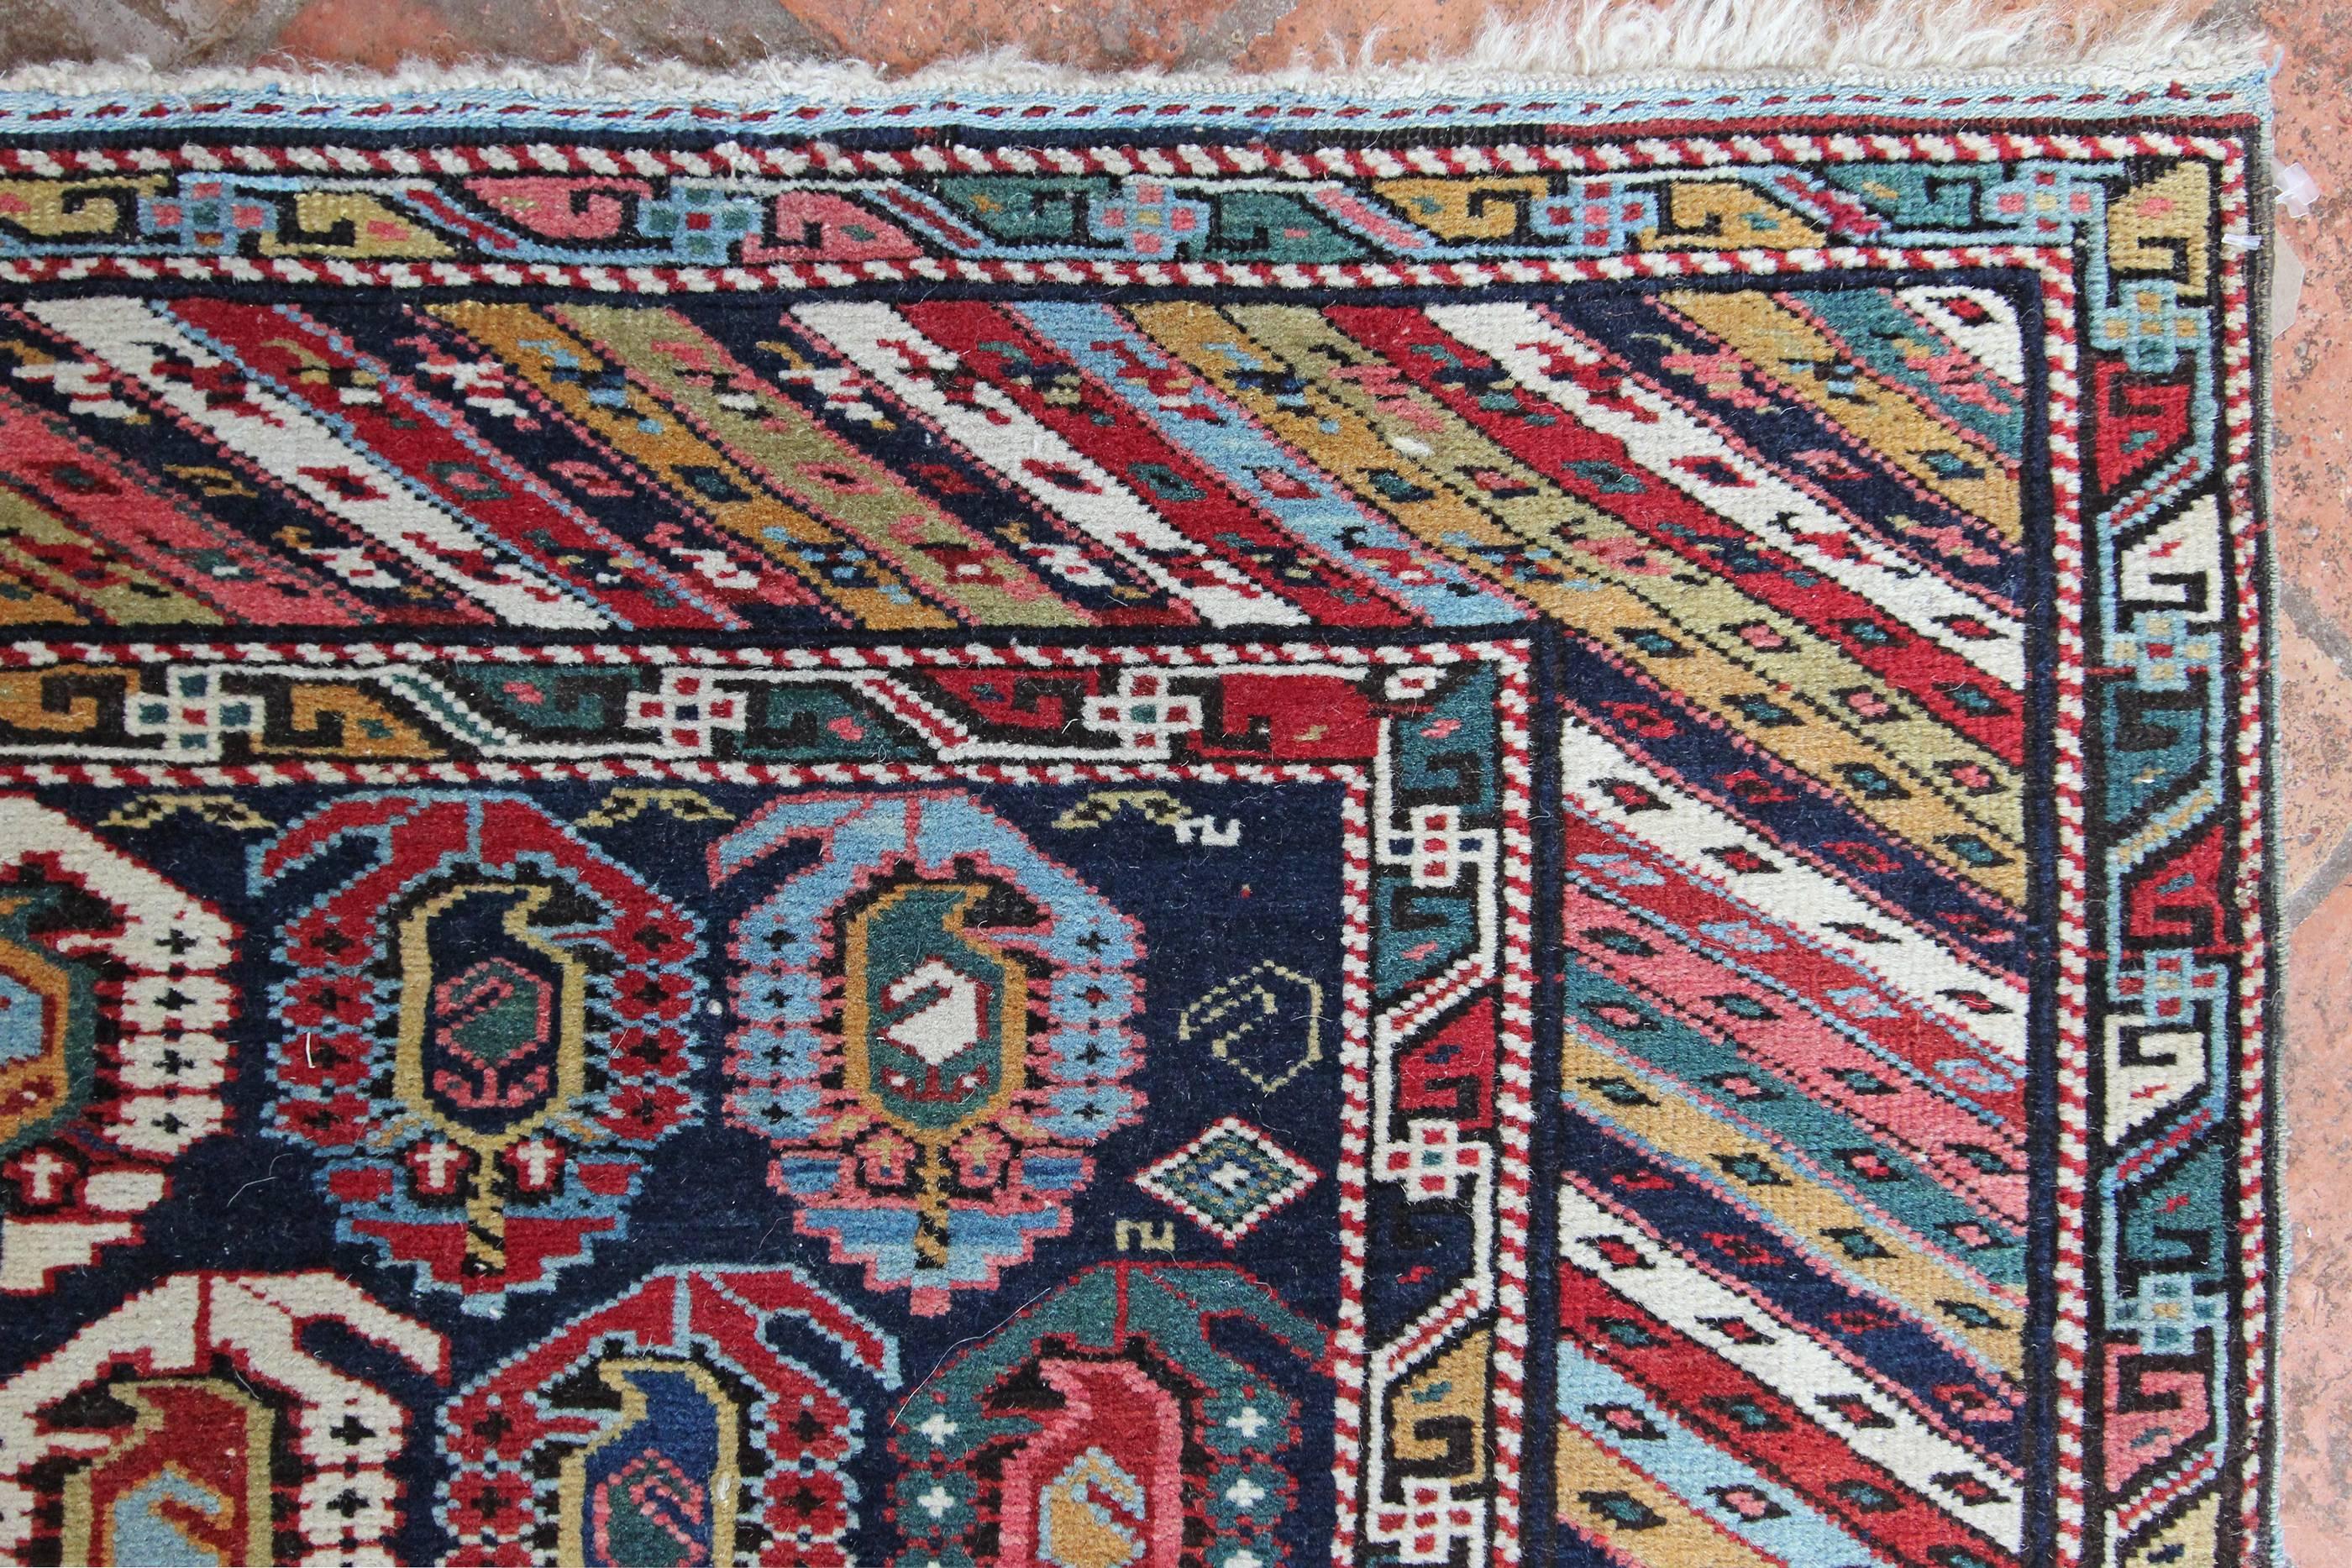 An antique Kuba rug in fantastic original condition with beautiful colours and varying in design from mother and daughter Boteh motifs in the centre to a striped Genje border design. The weaver of this vibrant and interesting antique Caucasian rug